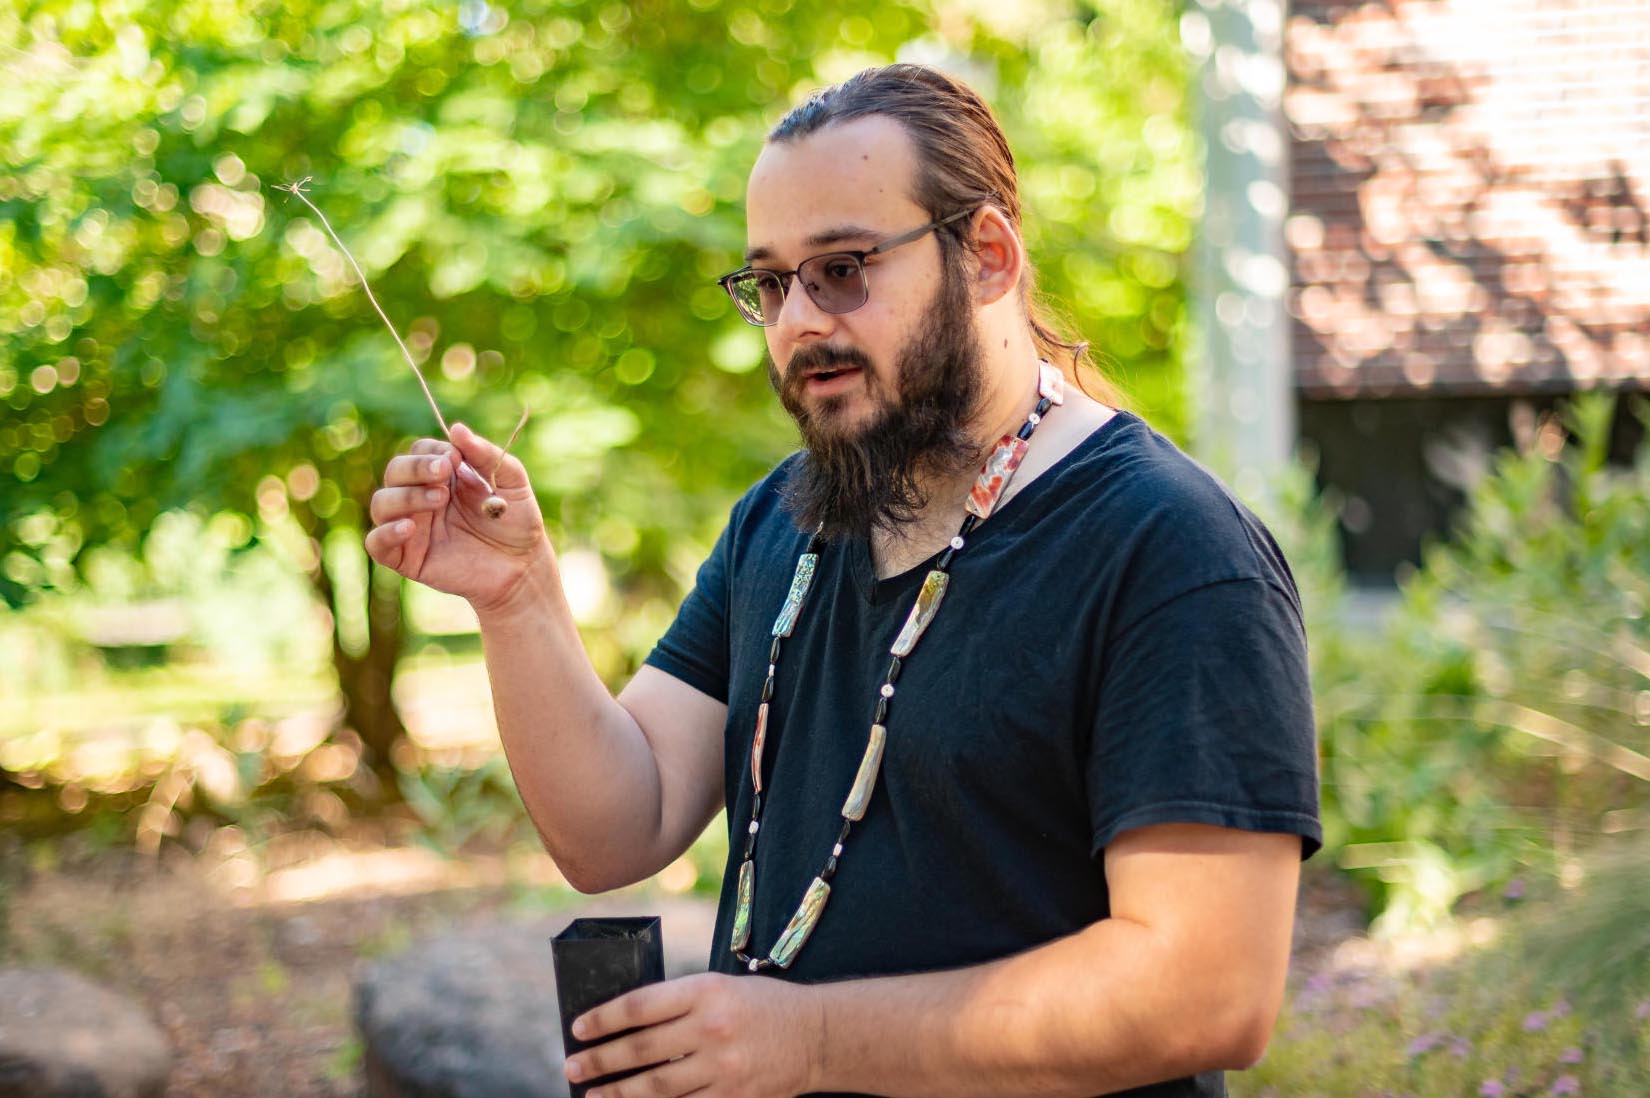 A Native American student gives a native plant tour on campus